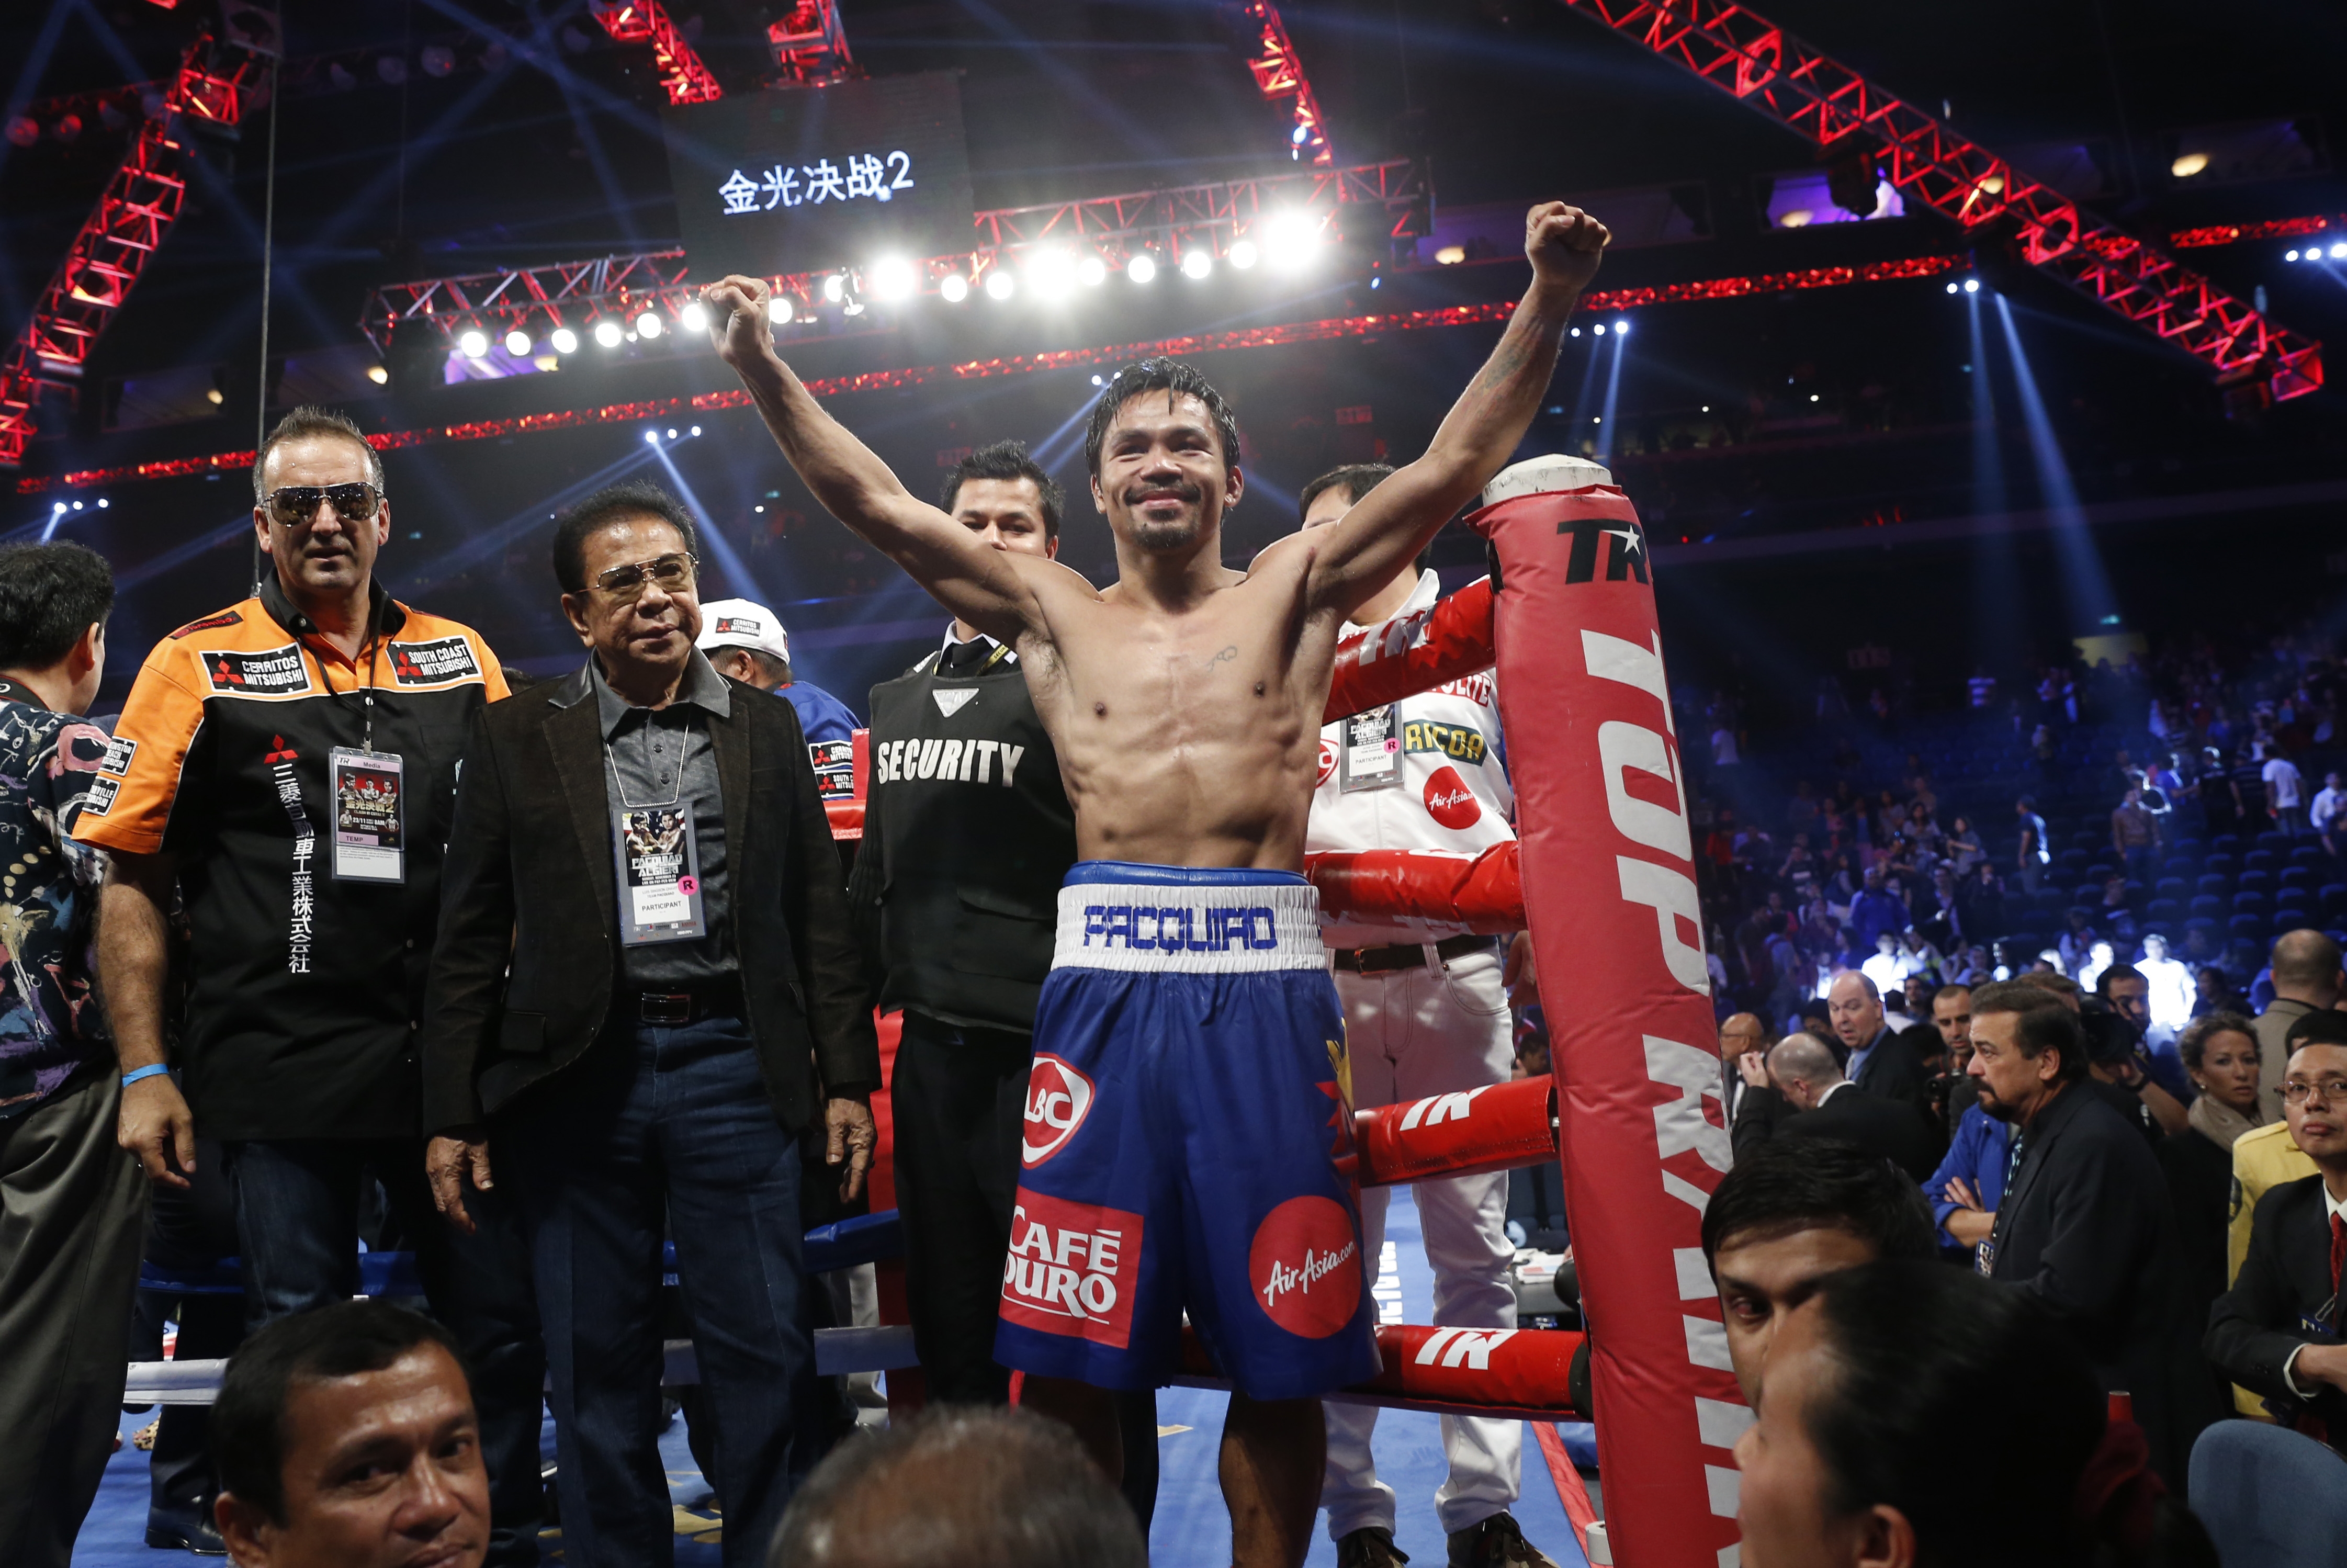 WBO welterweight champion Manny Pacquiao, center, celebrates after defeating WBO junior welterweight champion Chris Algieri of the United States during their welterweight title boxing match at the Venetian Macao in Macau, Sunday, Nov. 23, 2014 (Kin Cheung—AP)